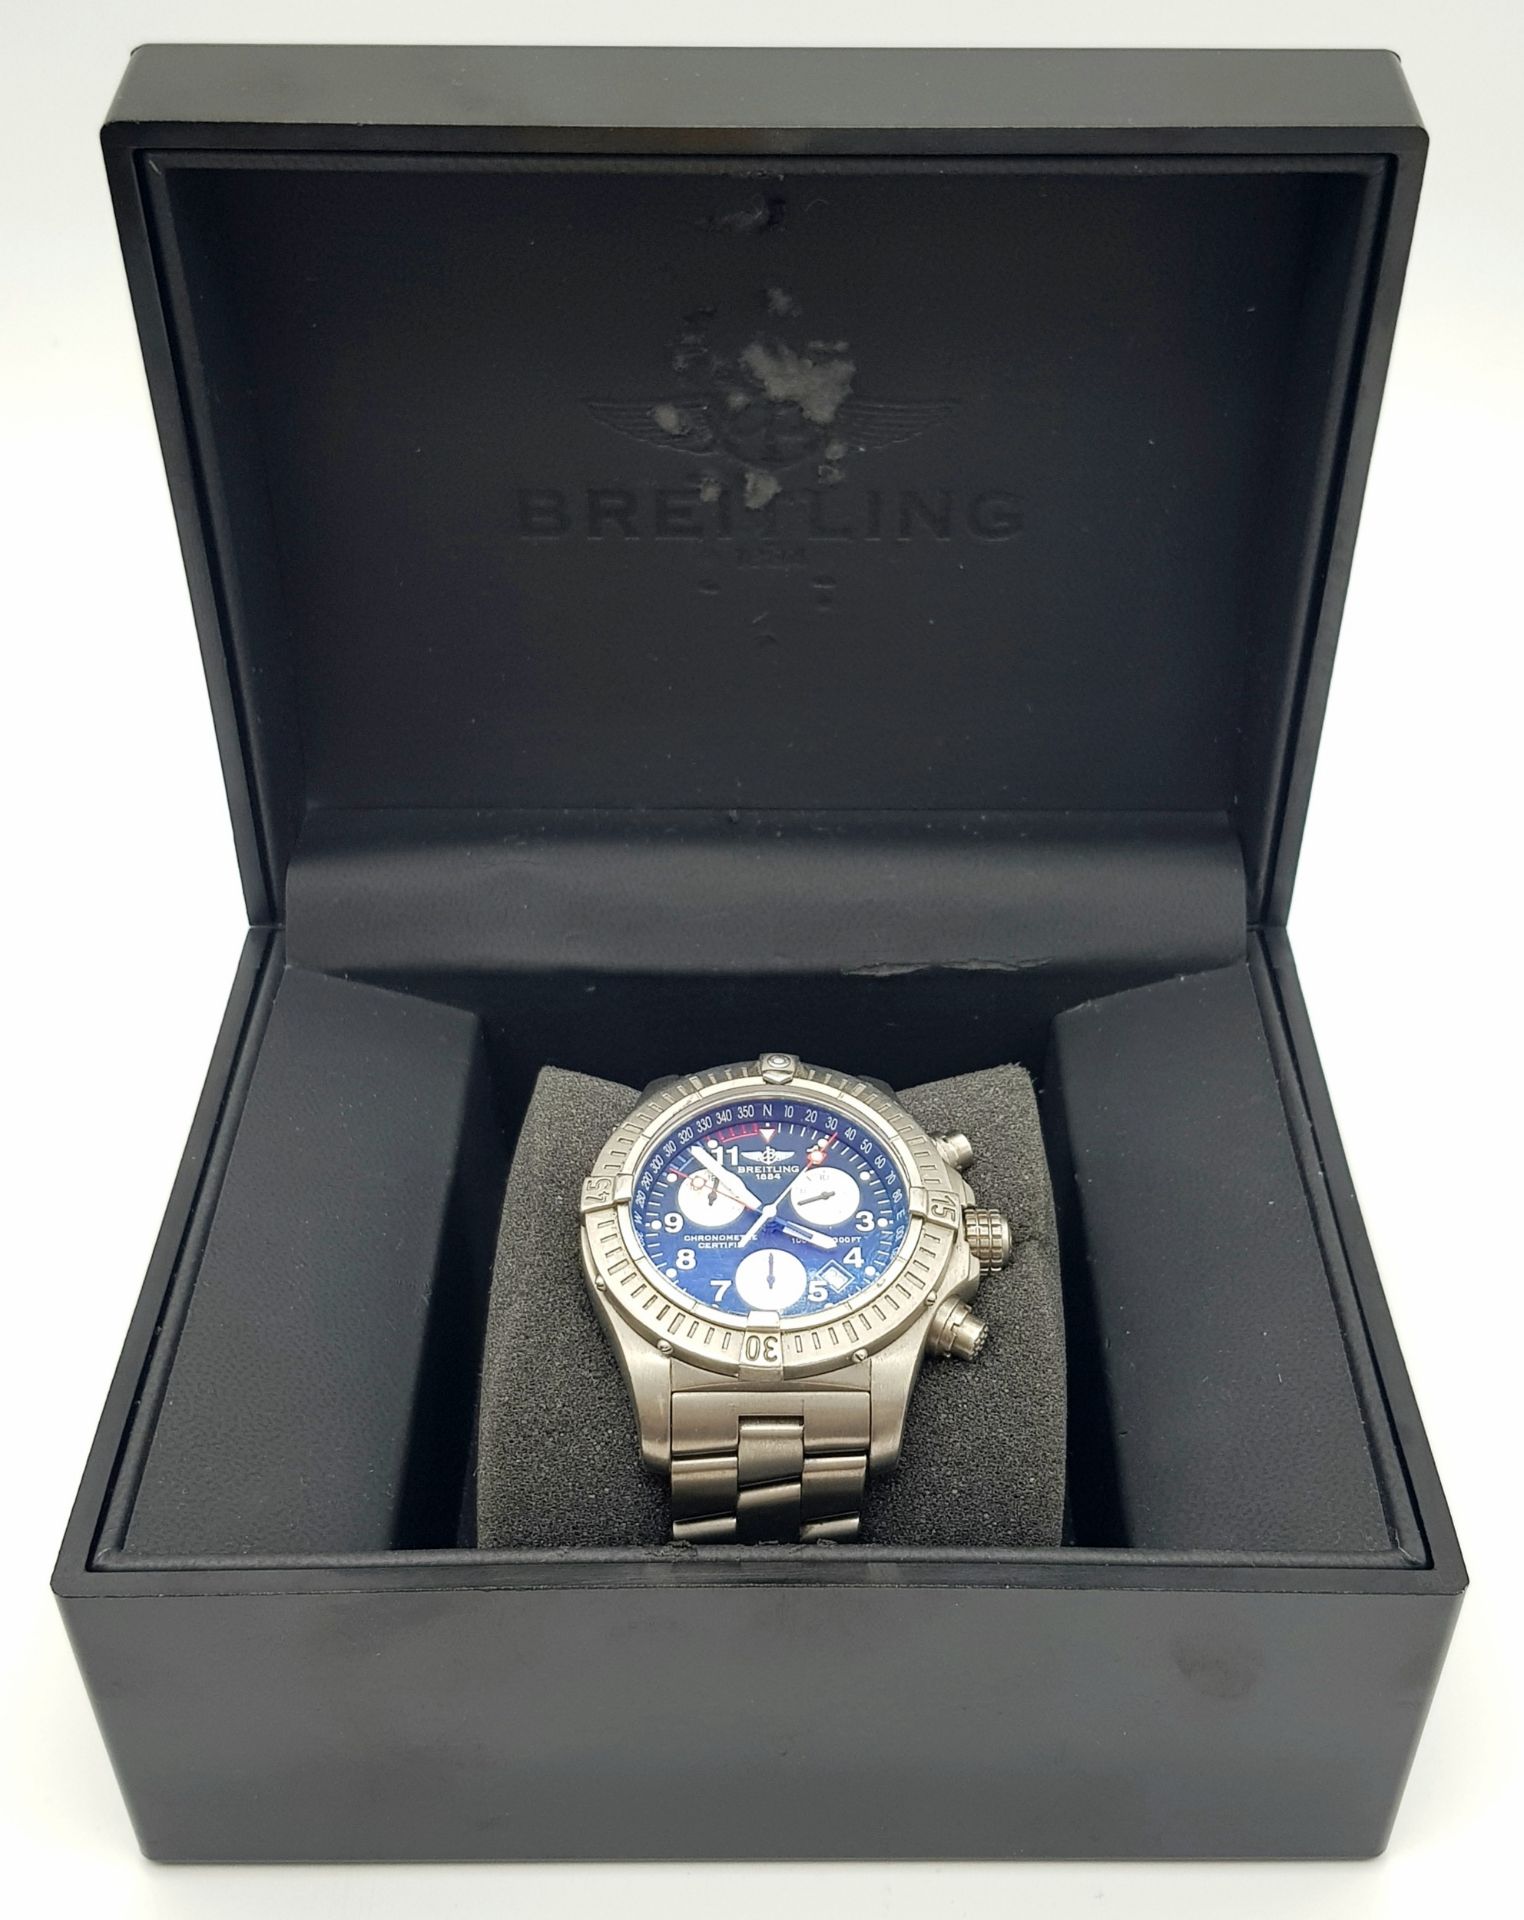 A BREITLING GTS CHRONOMETRE IN STAINLESS STEEL WITH BLUE FACE AND 3 SUBDIALS , AUTOMATIC - Image 8 of 10